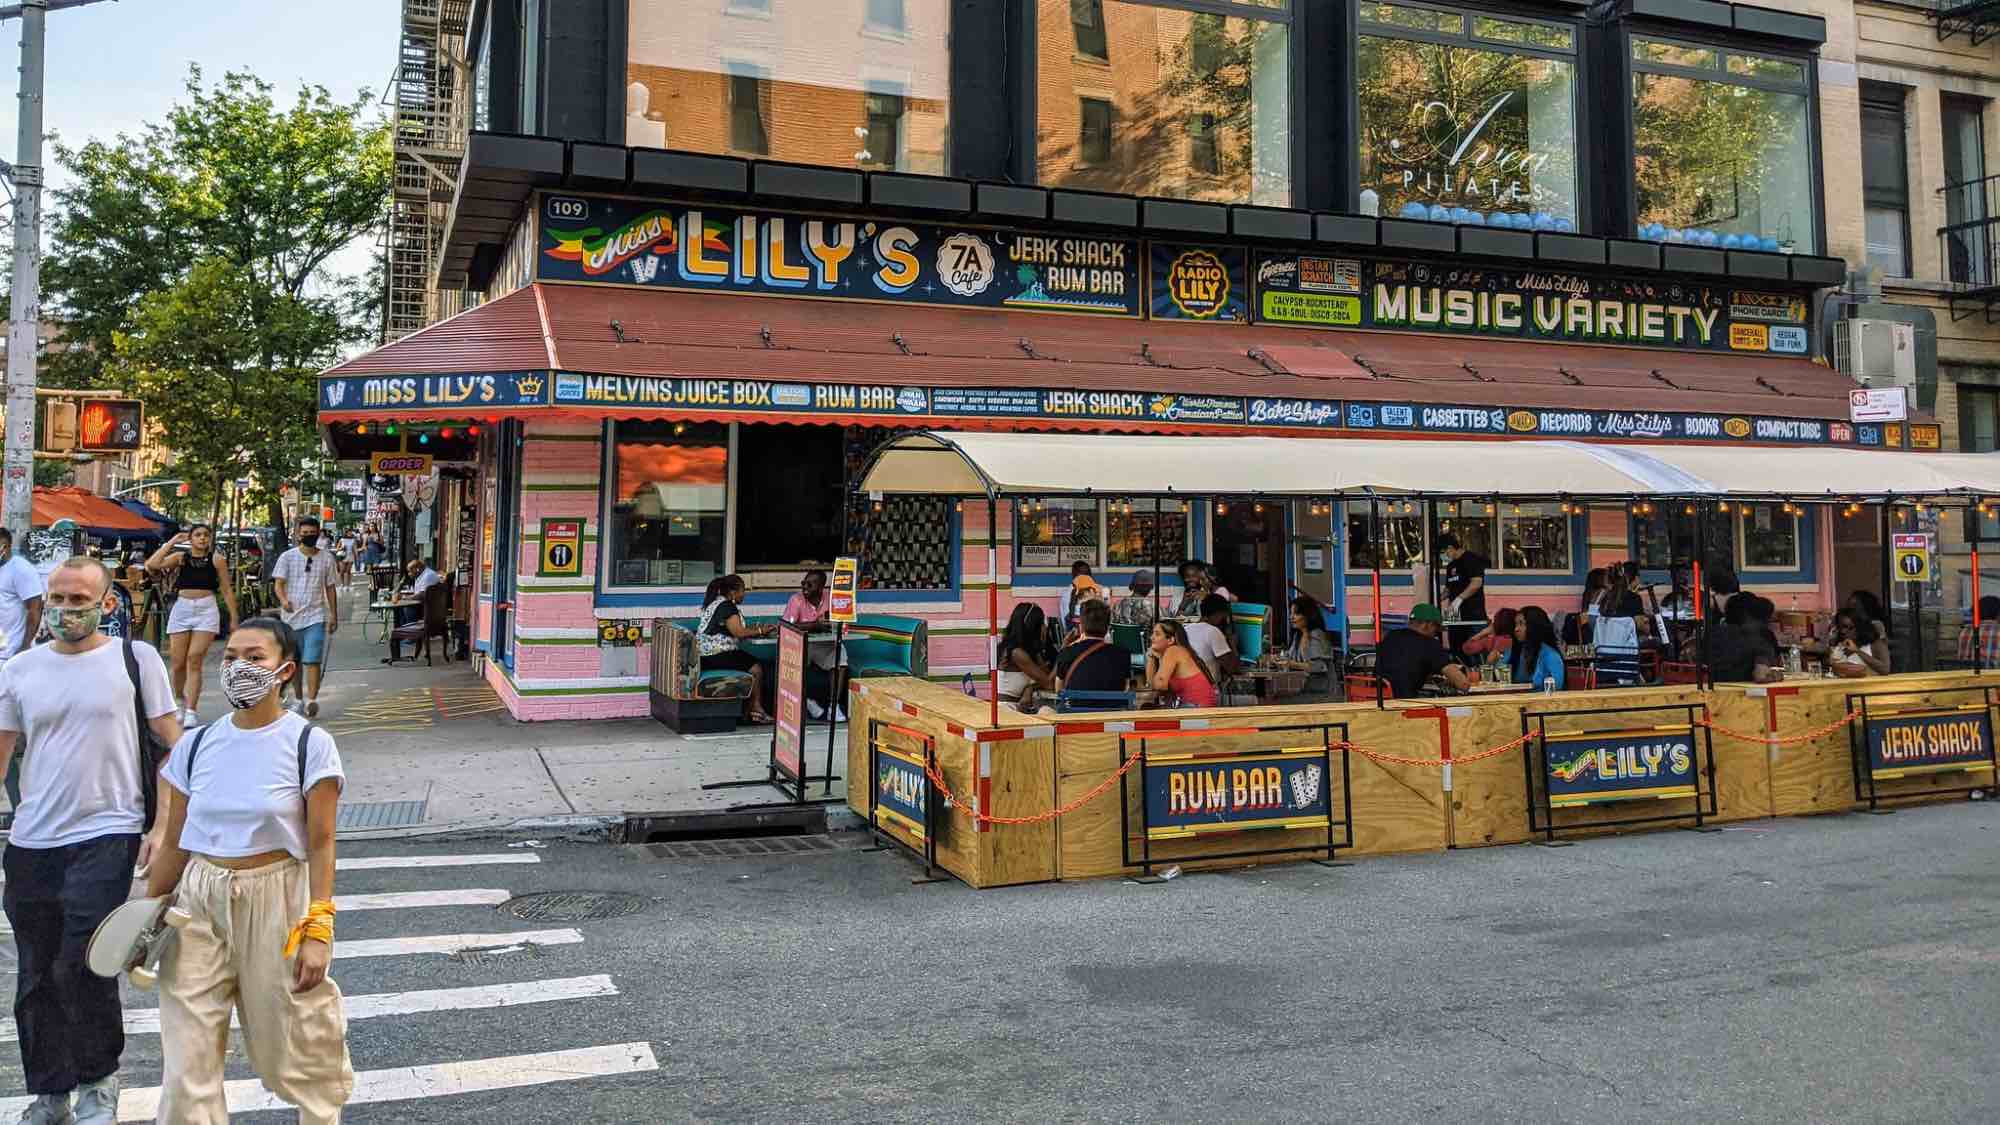 Outdoor dining structures at Miss Lily's in the East Village.